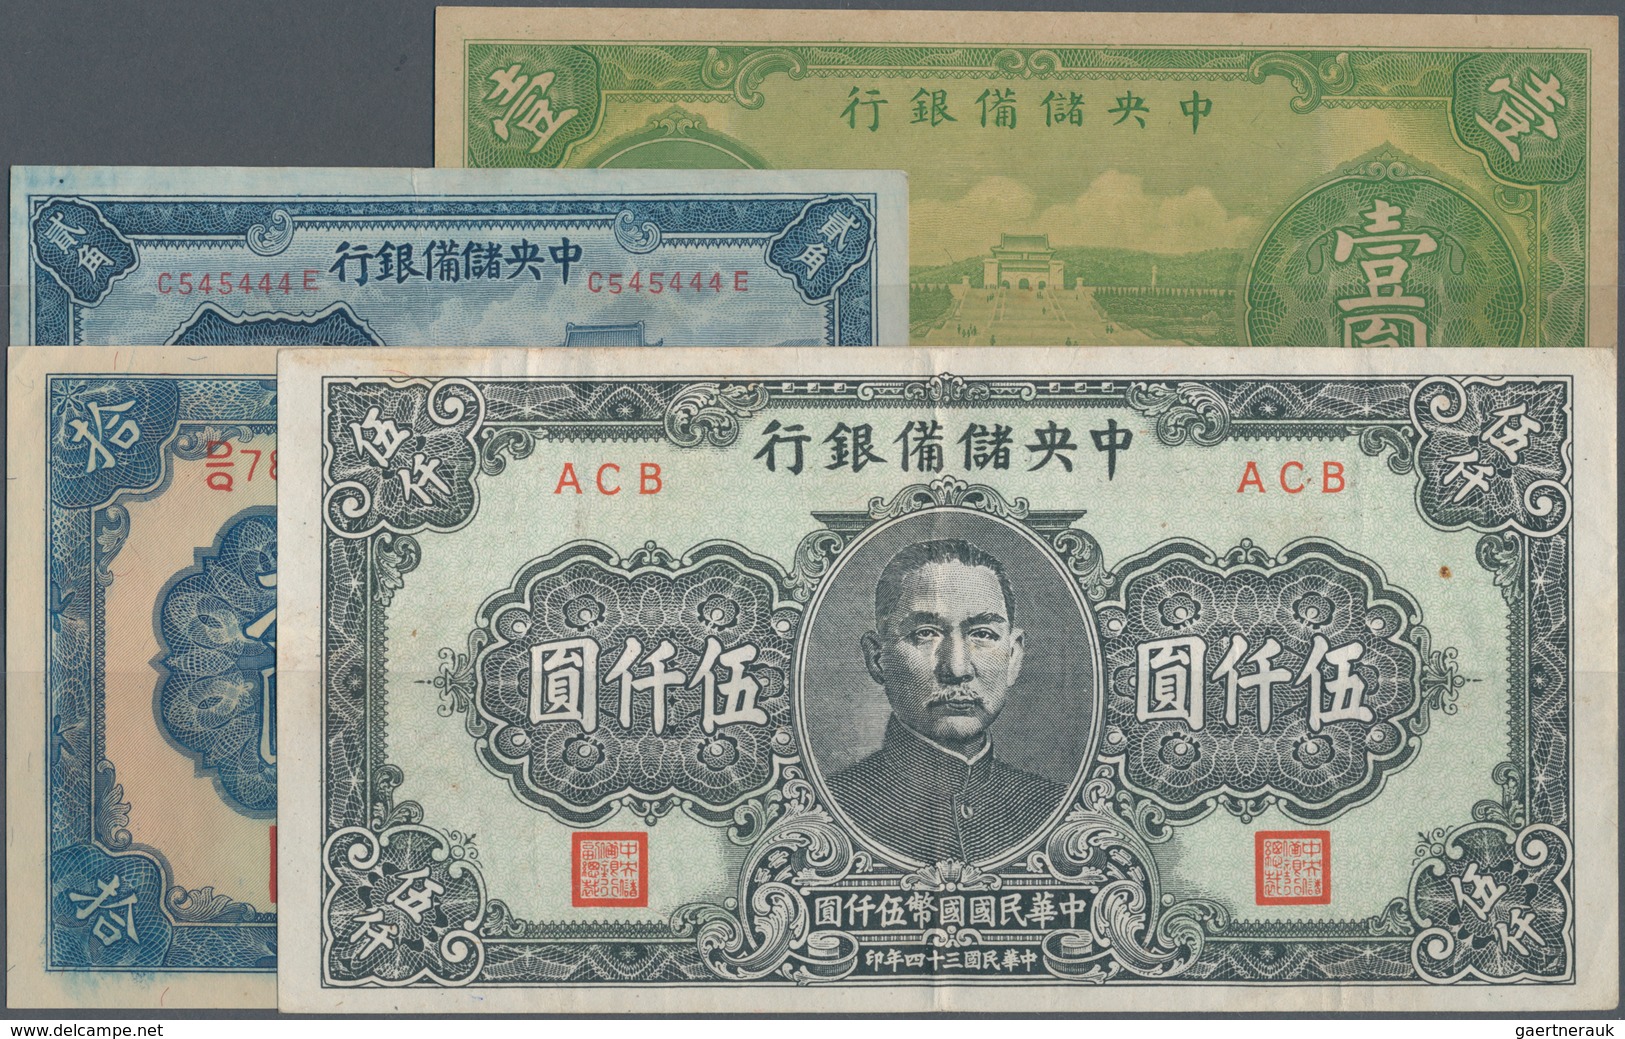 China: Very Nice Set With 22 Banknotes Central Reserve Bank Of China, Japanese Puppet Banks 20 Cents - China